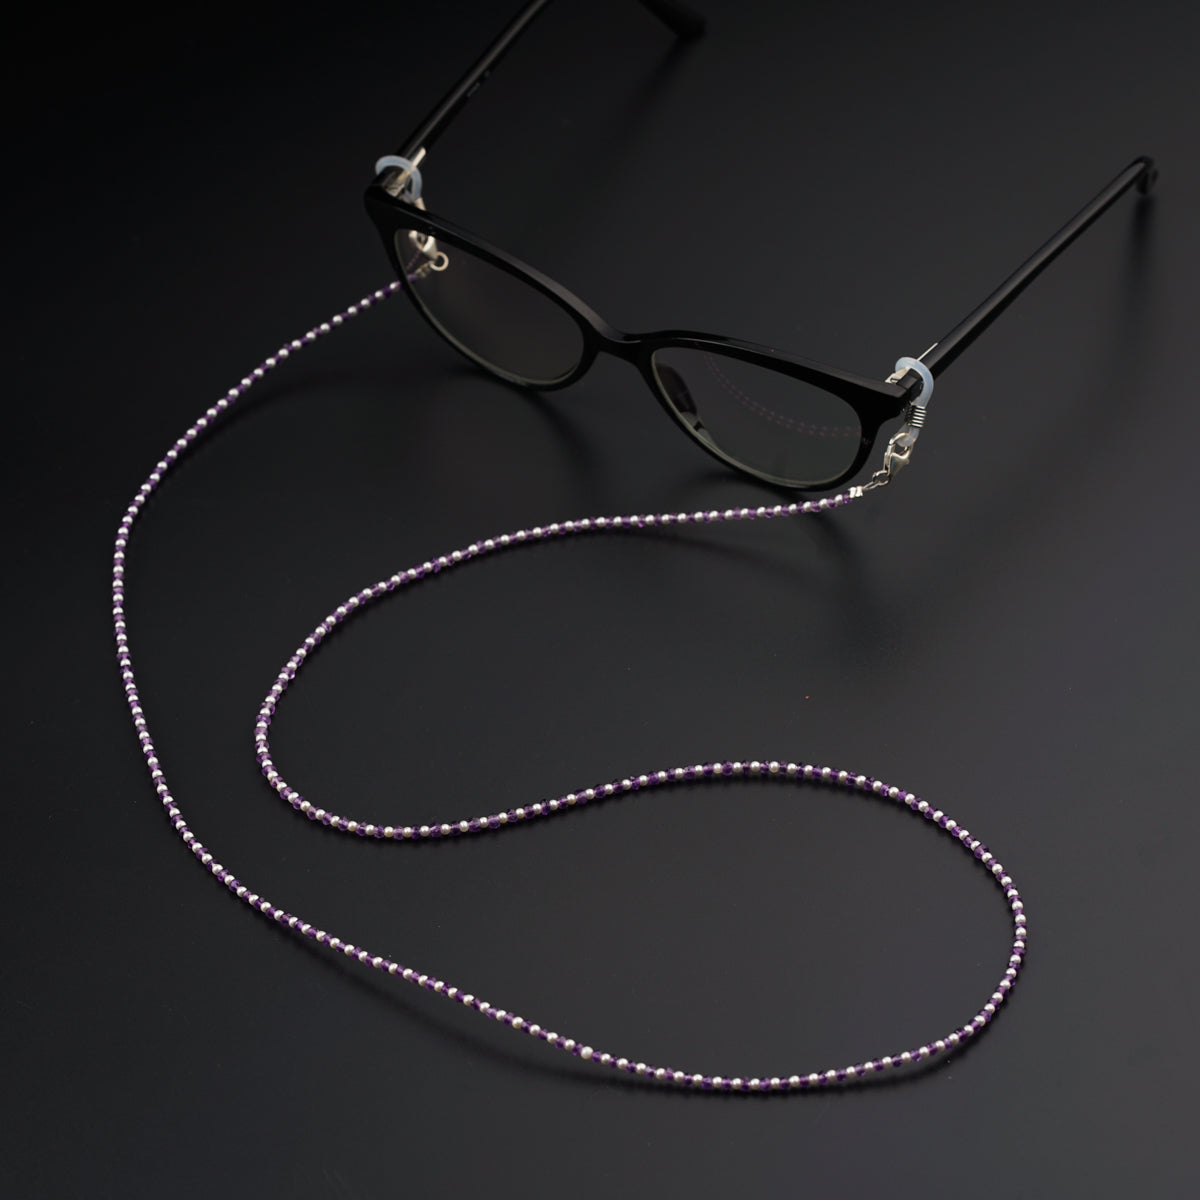 a pair of glasses and a beaded lanyard on a black surface